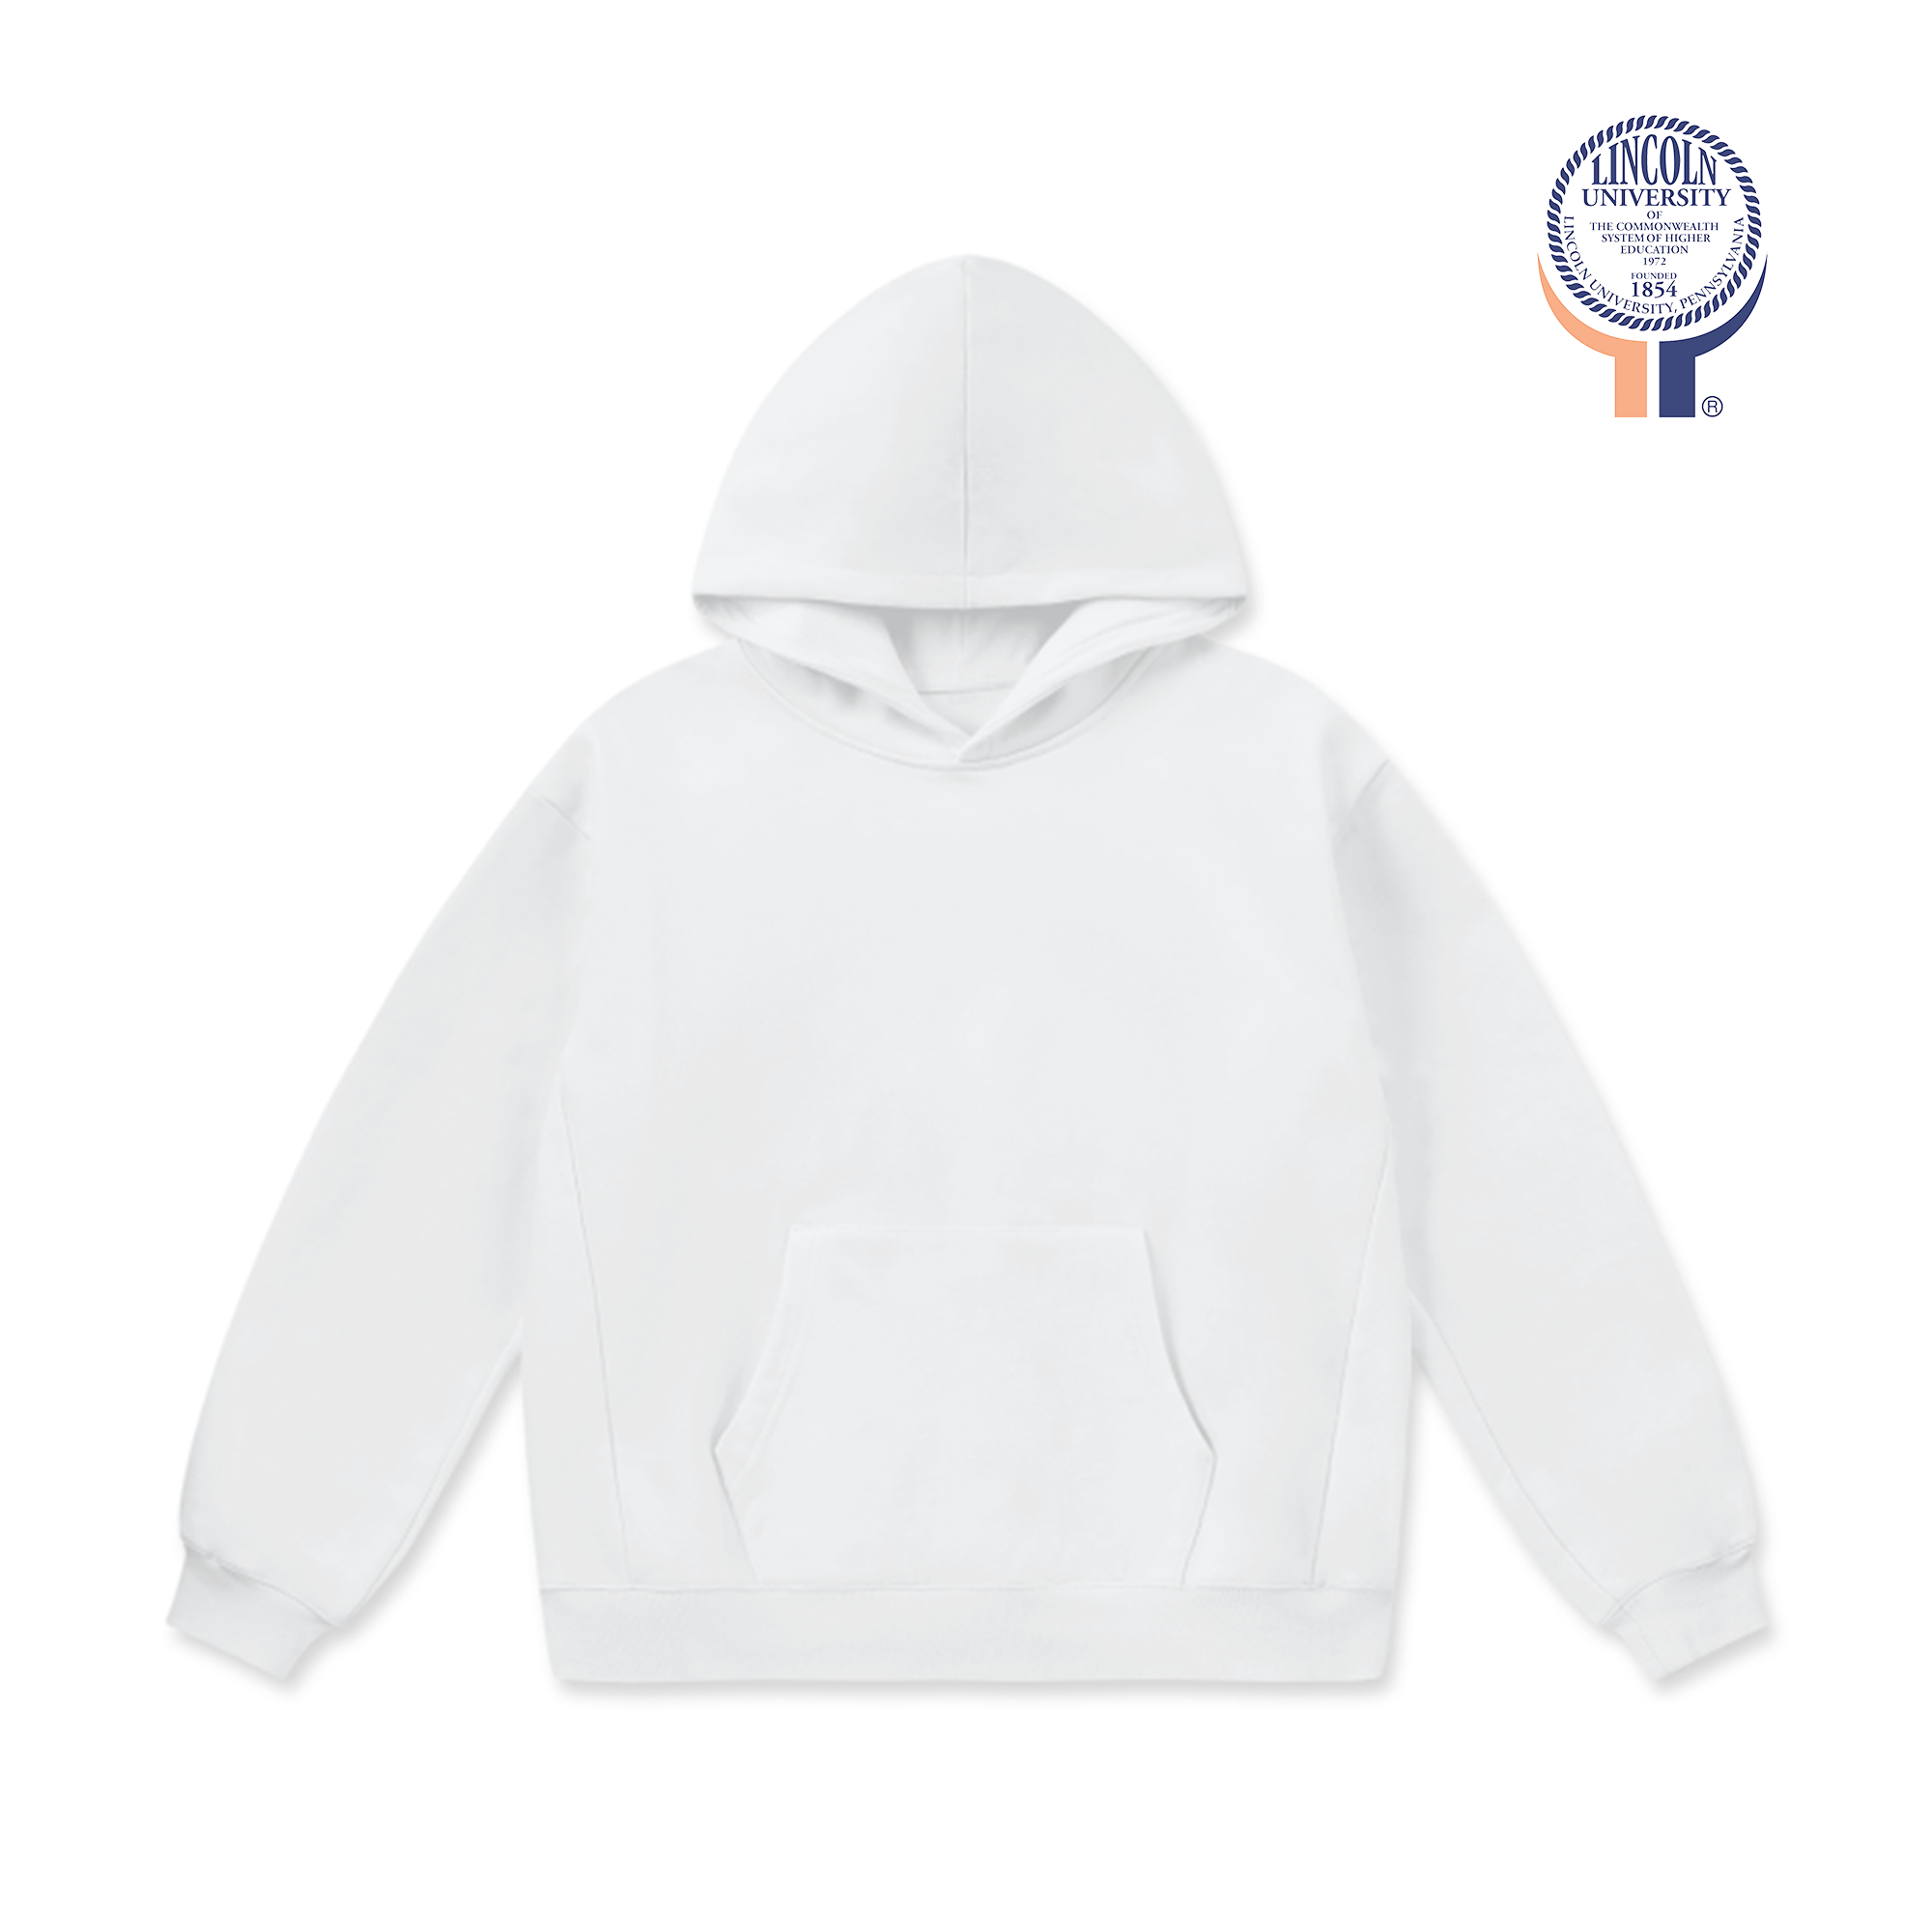 LCC Super Weighted Hoodie - Lincoln University (Classic Ver.2)